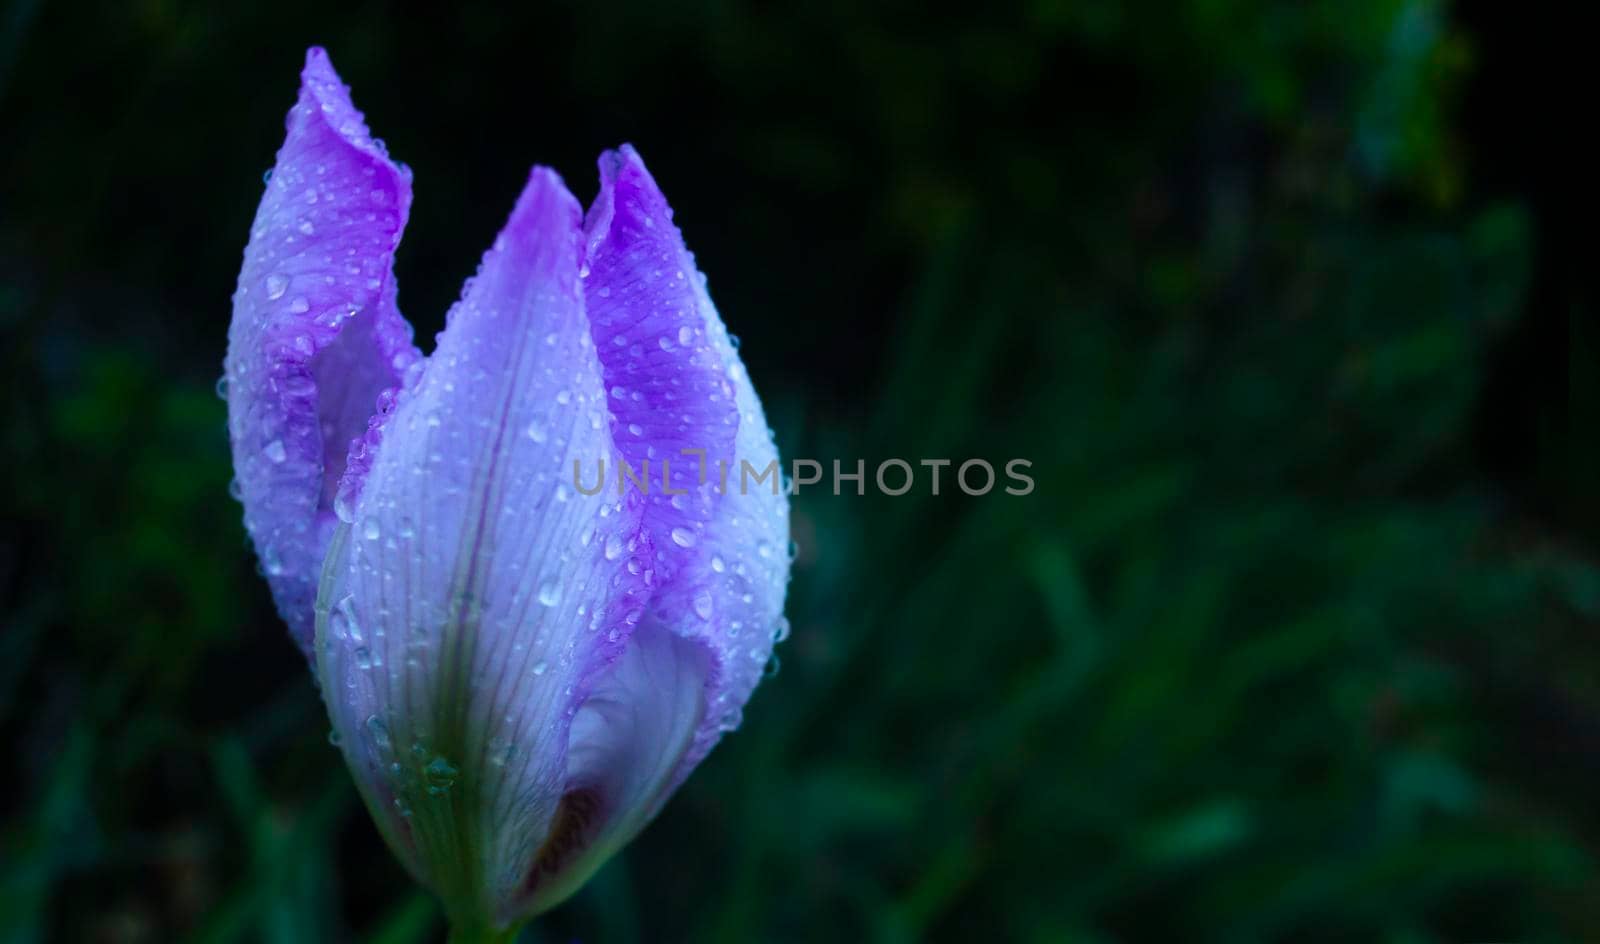 Flowering irises with drops of water after rain by mtx